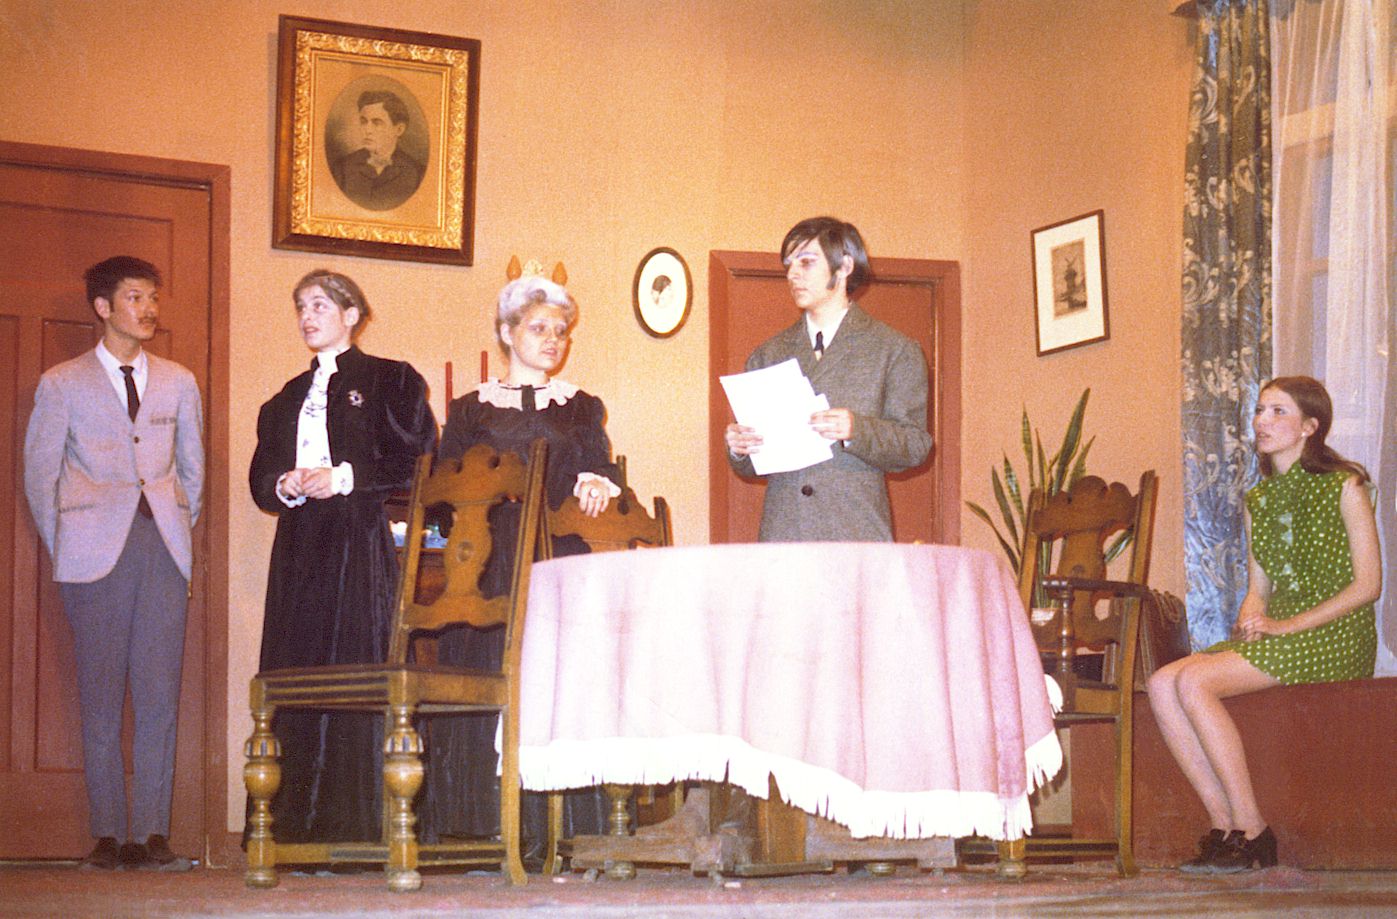 Arsenic & Old Lace production